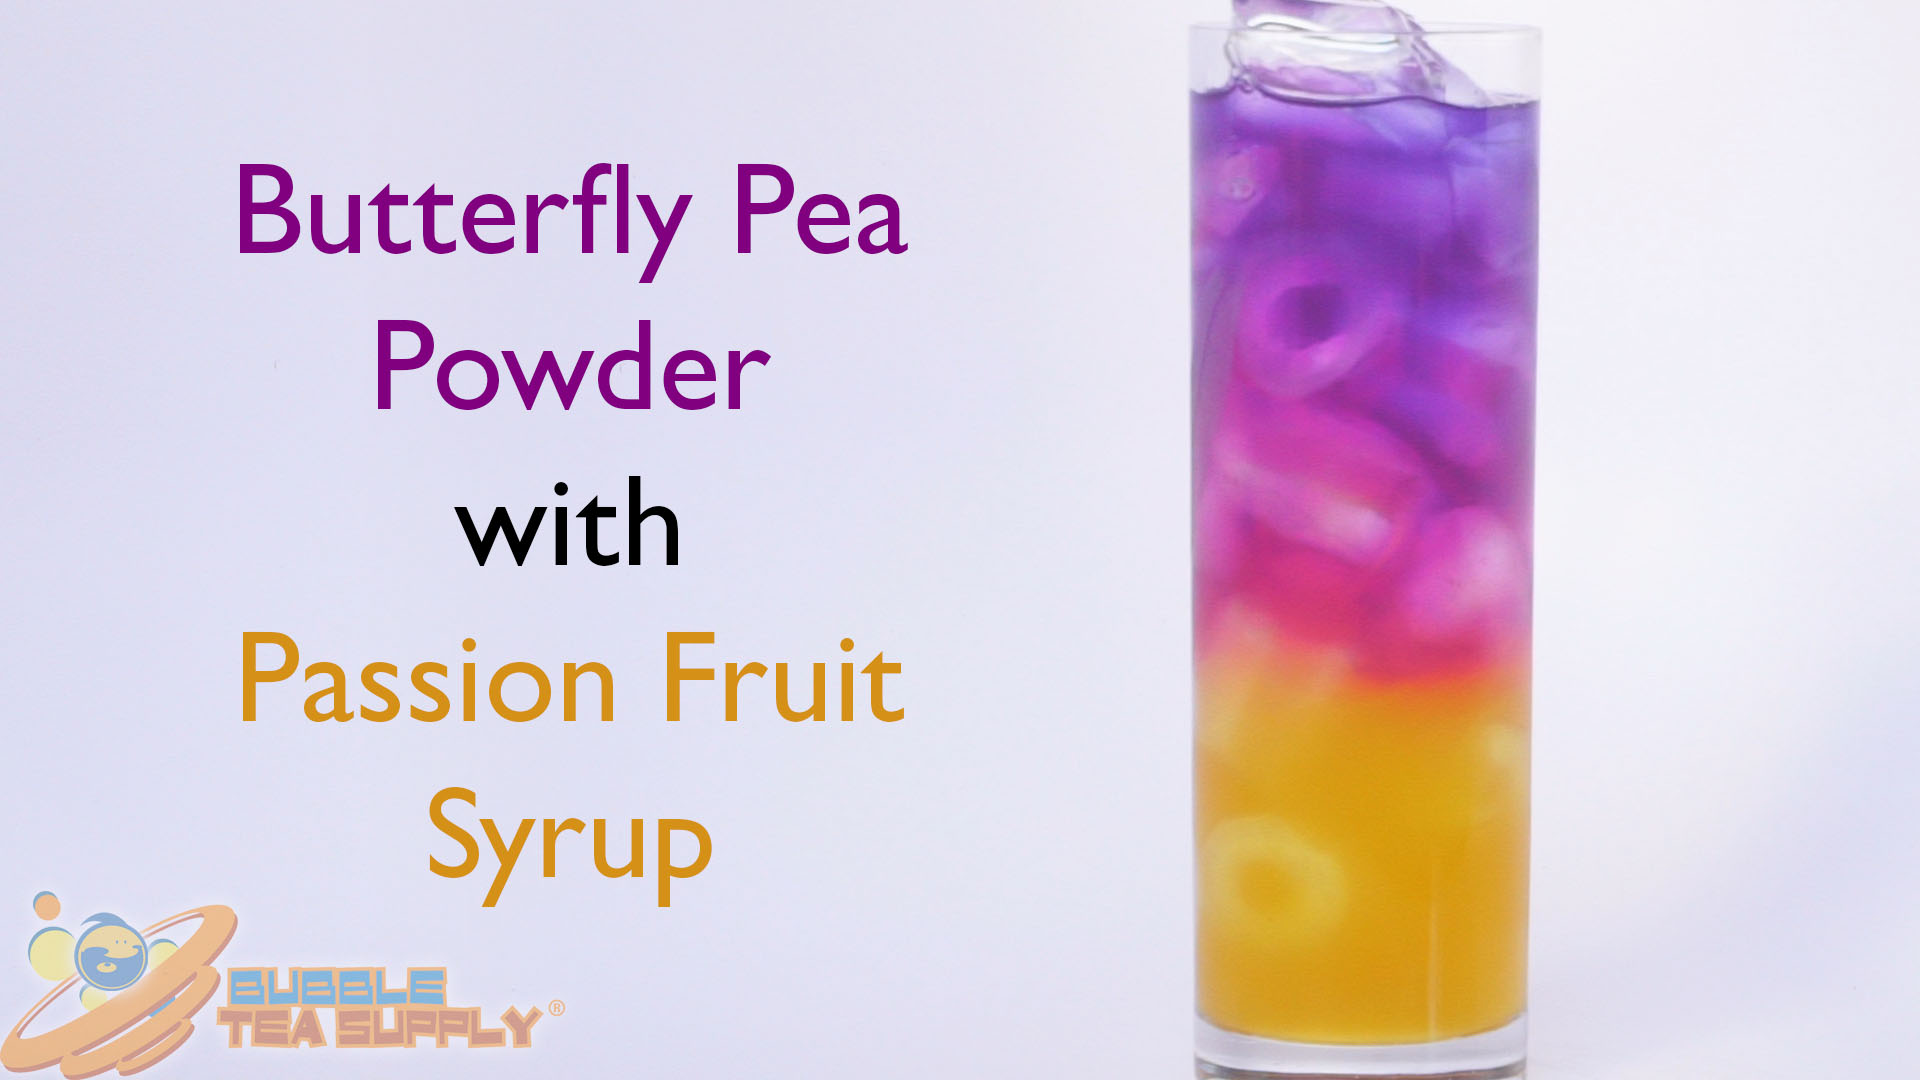 How to Make a Butterfly Pea with Passion Fruit Syrup Drink